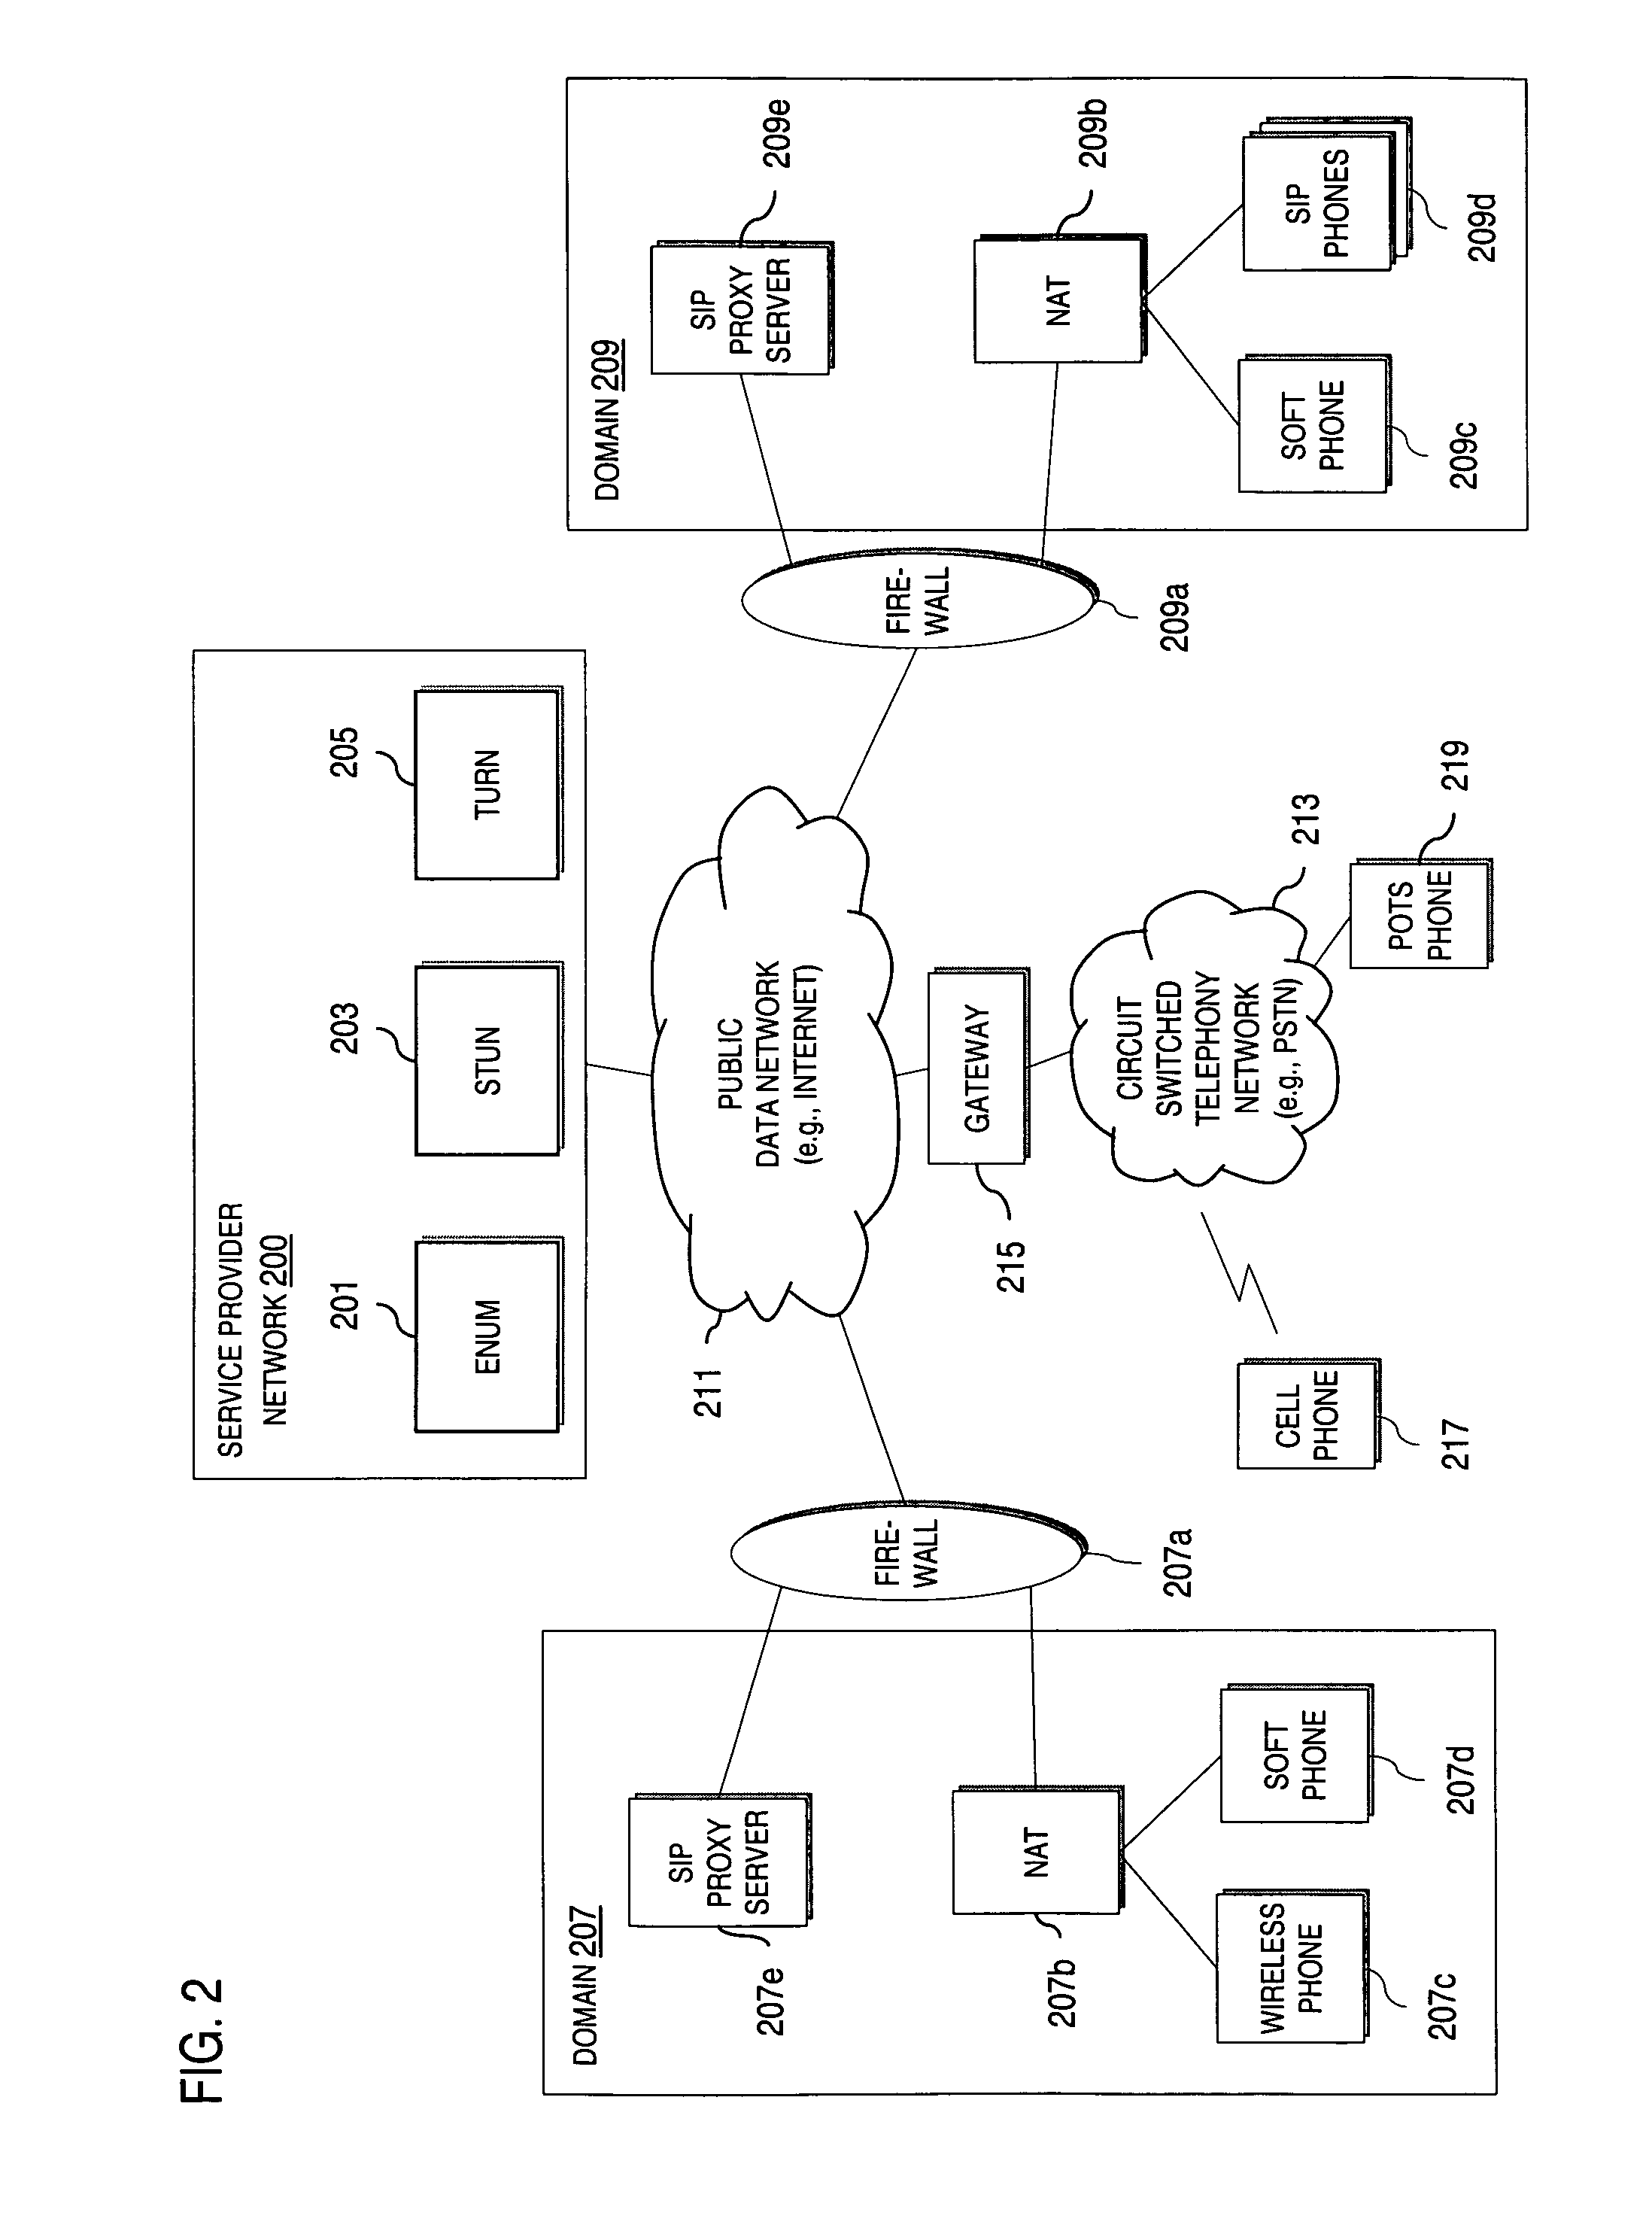 Method and system for providing voice over IP managed services utilizing a centralized data store